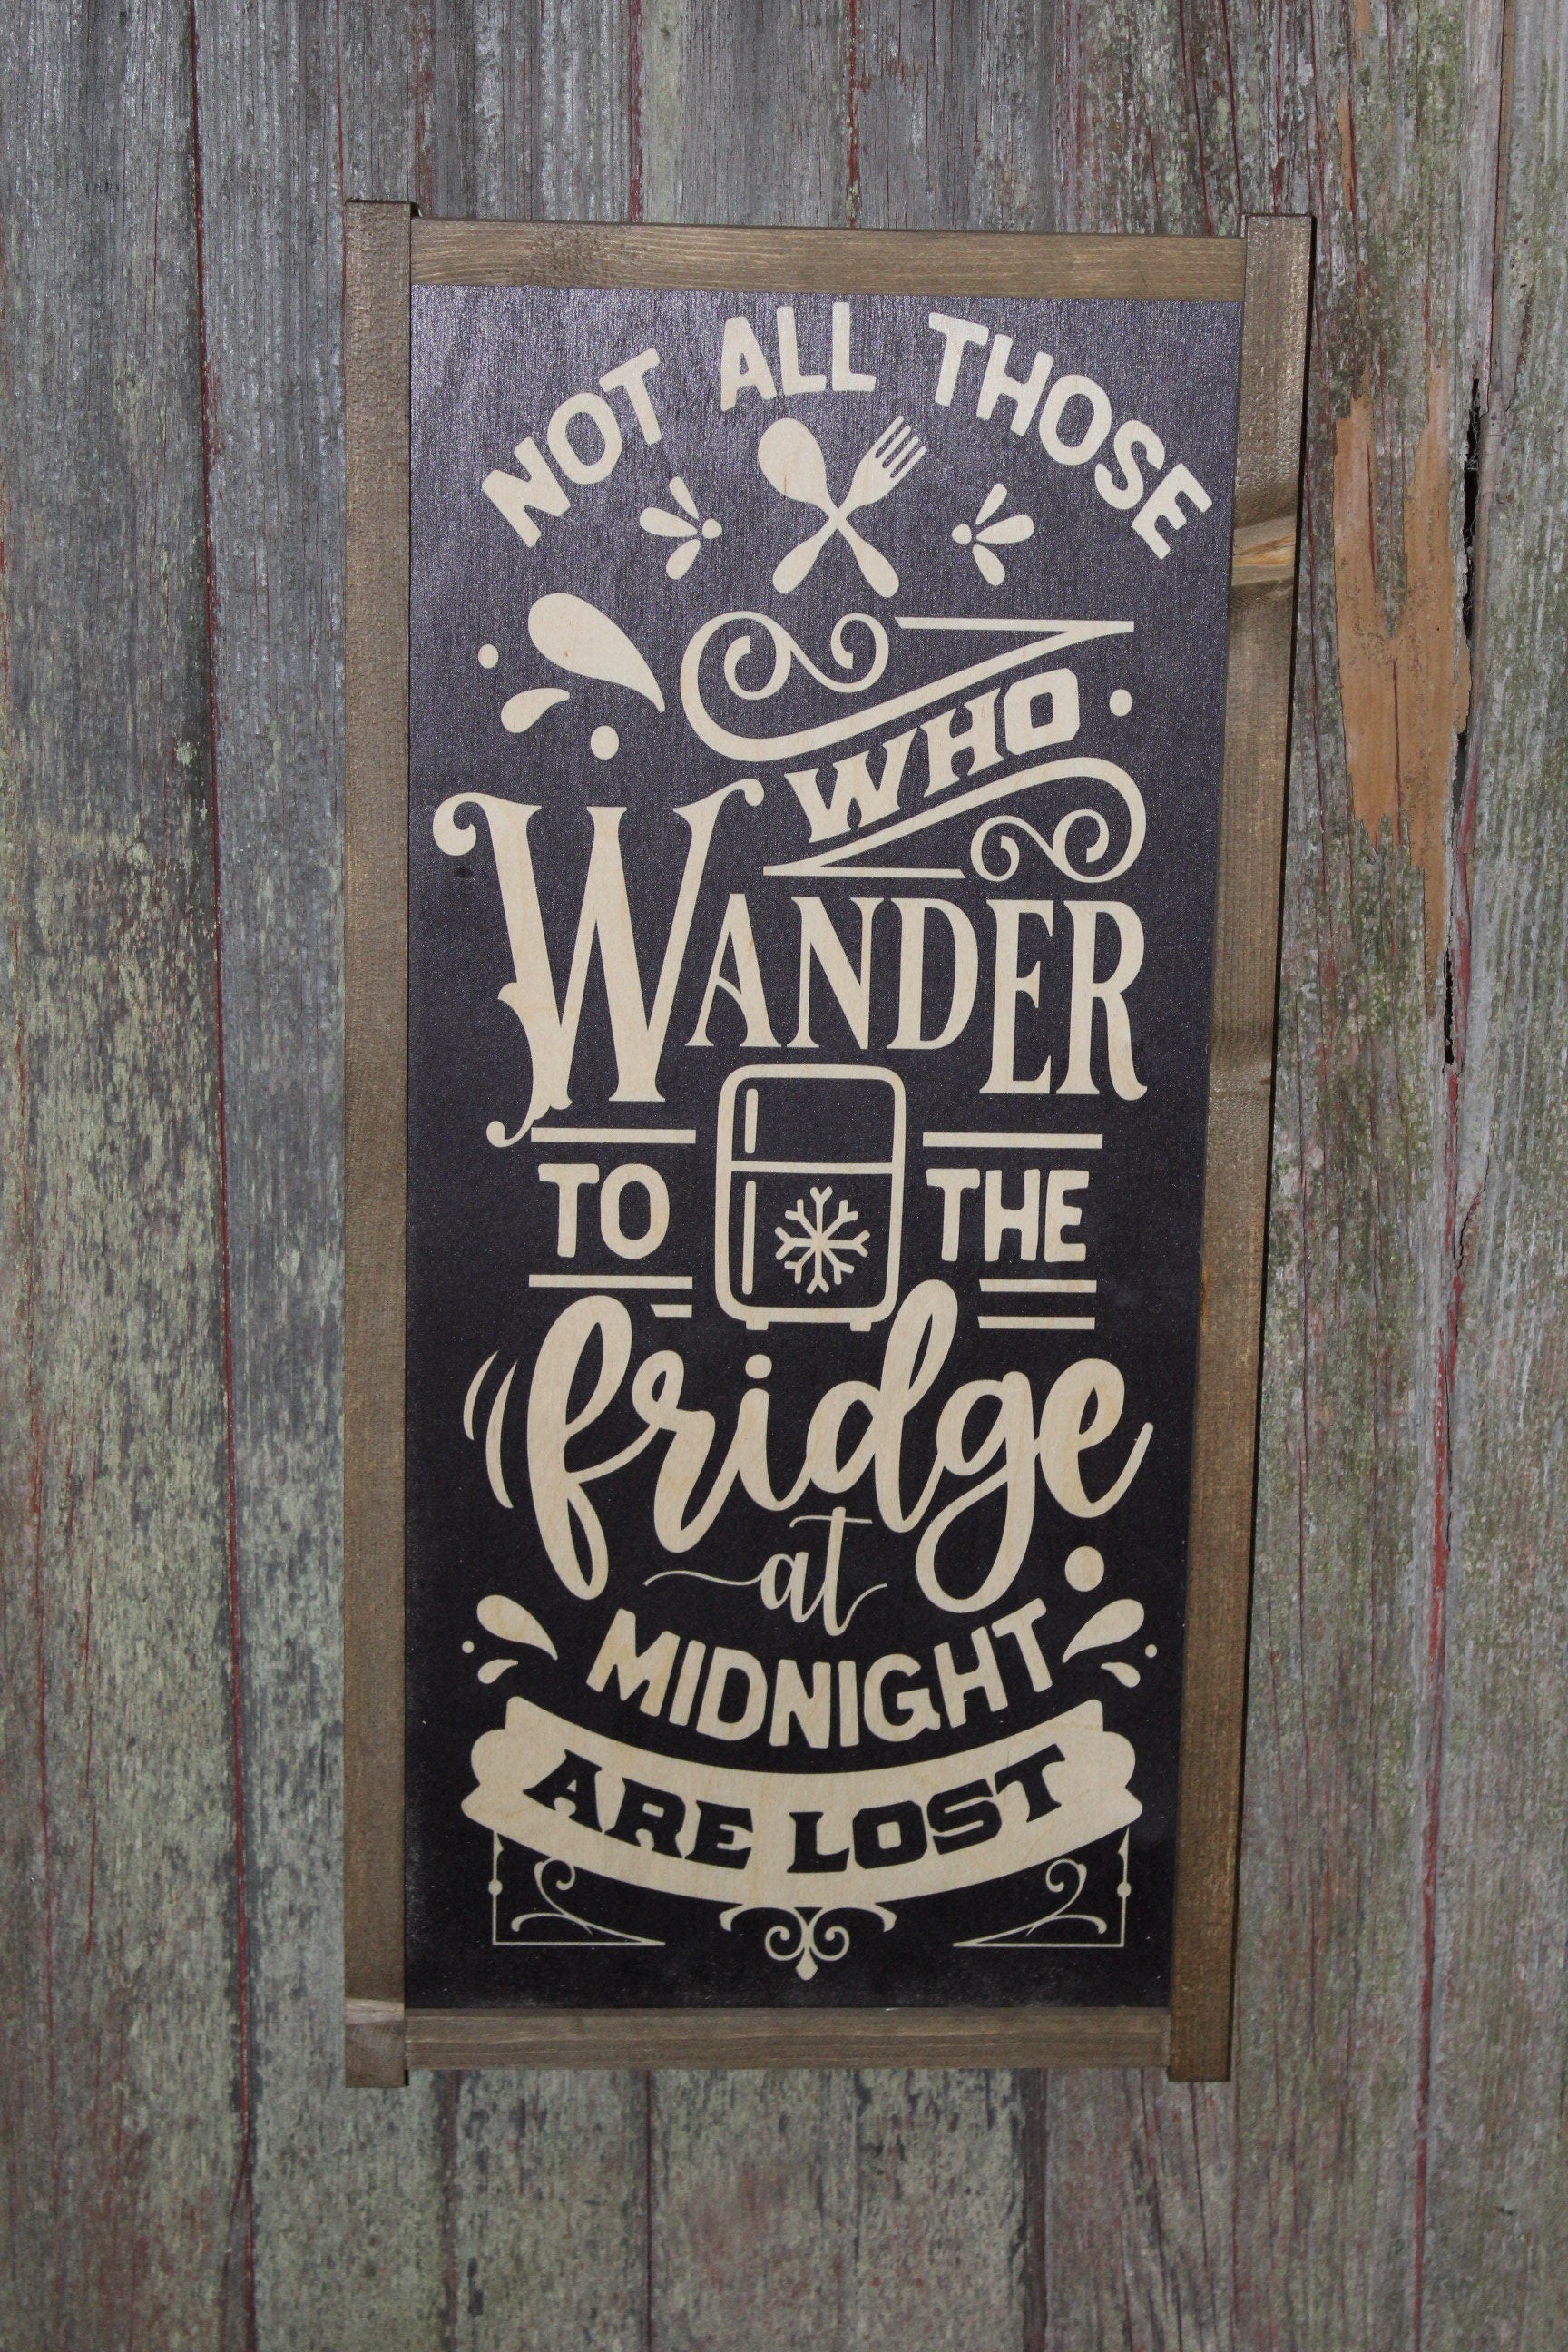 Not All Who Wonder Wood Sign To The Fridge at Midnight Are Lost Humor Funny Kitchen Sign Wall Art Farmhouse Primitive Rustic Text Large Pun